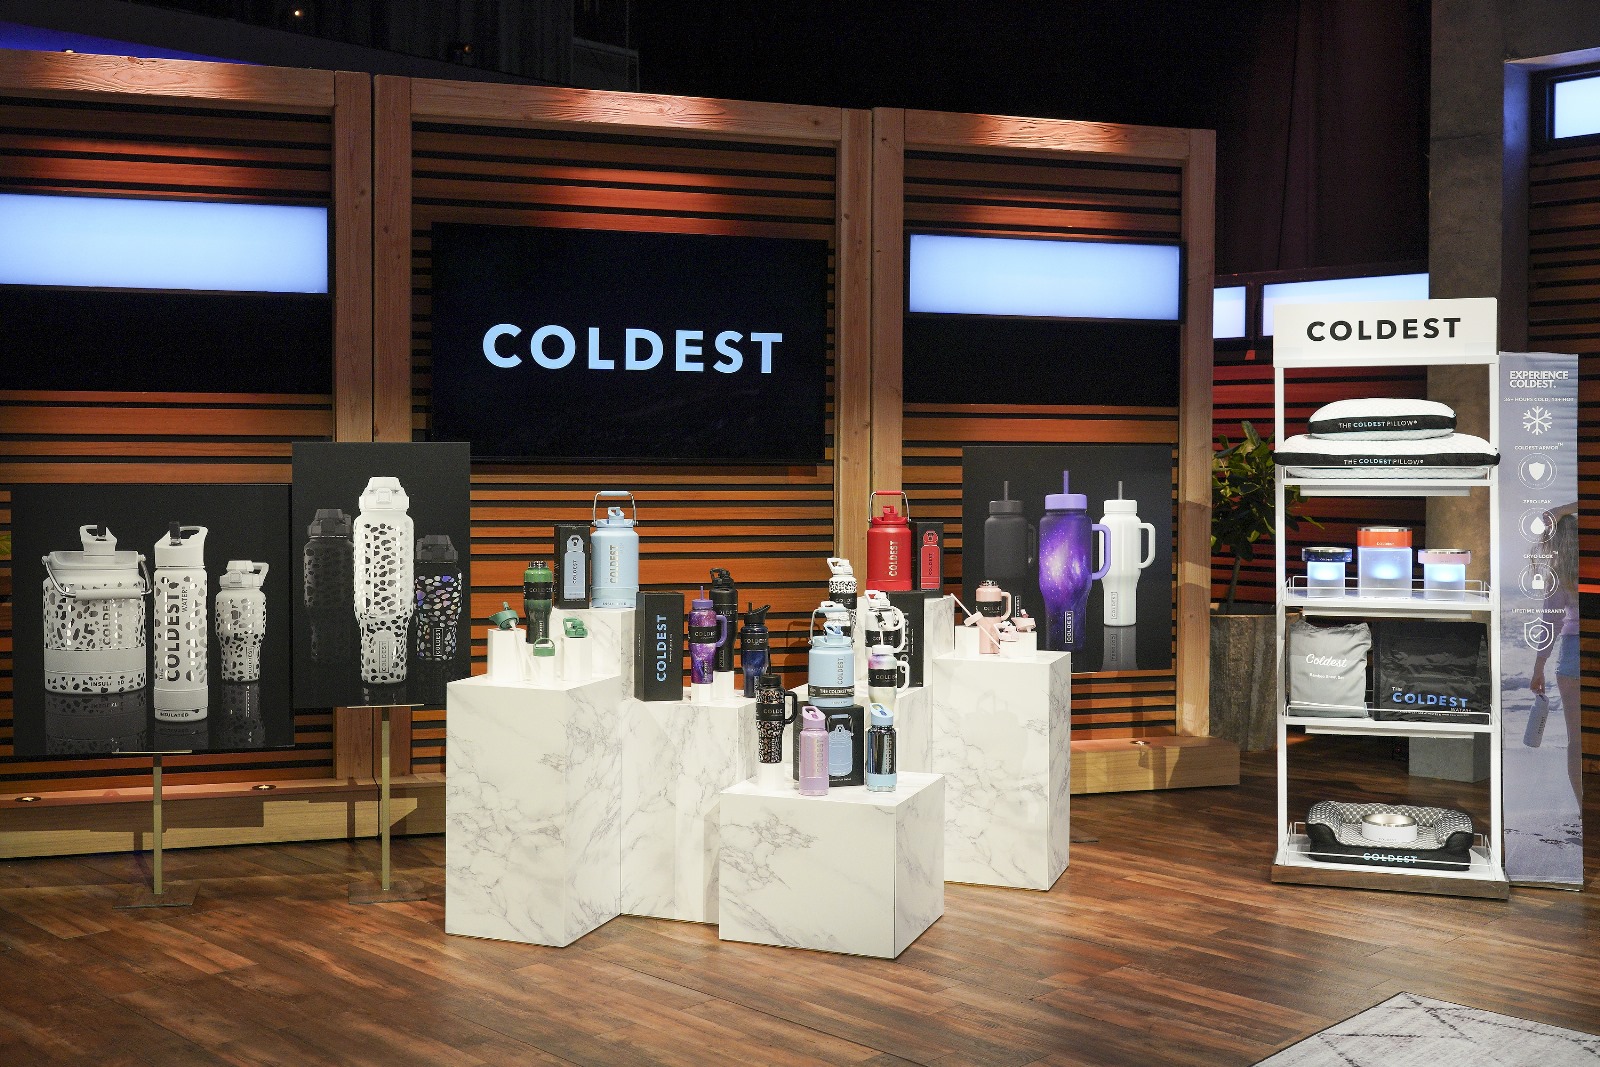 Naples entrepreneurs David and Joe Ahmad, owners of Coldest, sought offers from Shark Tank investors on a Feb. 23 episode.